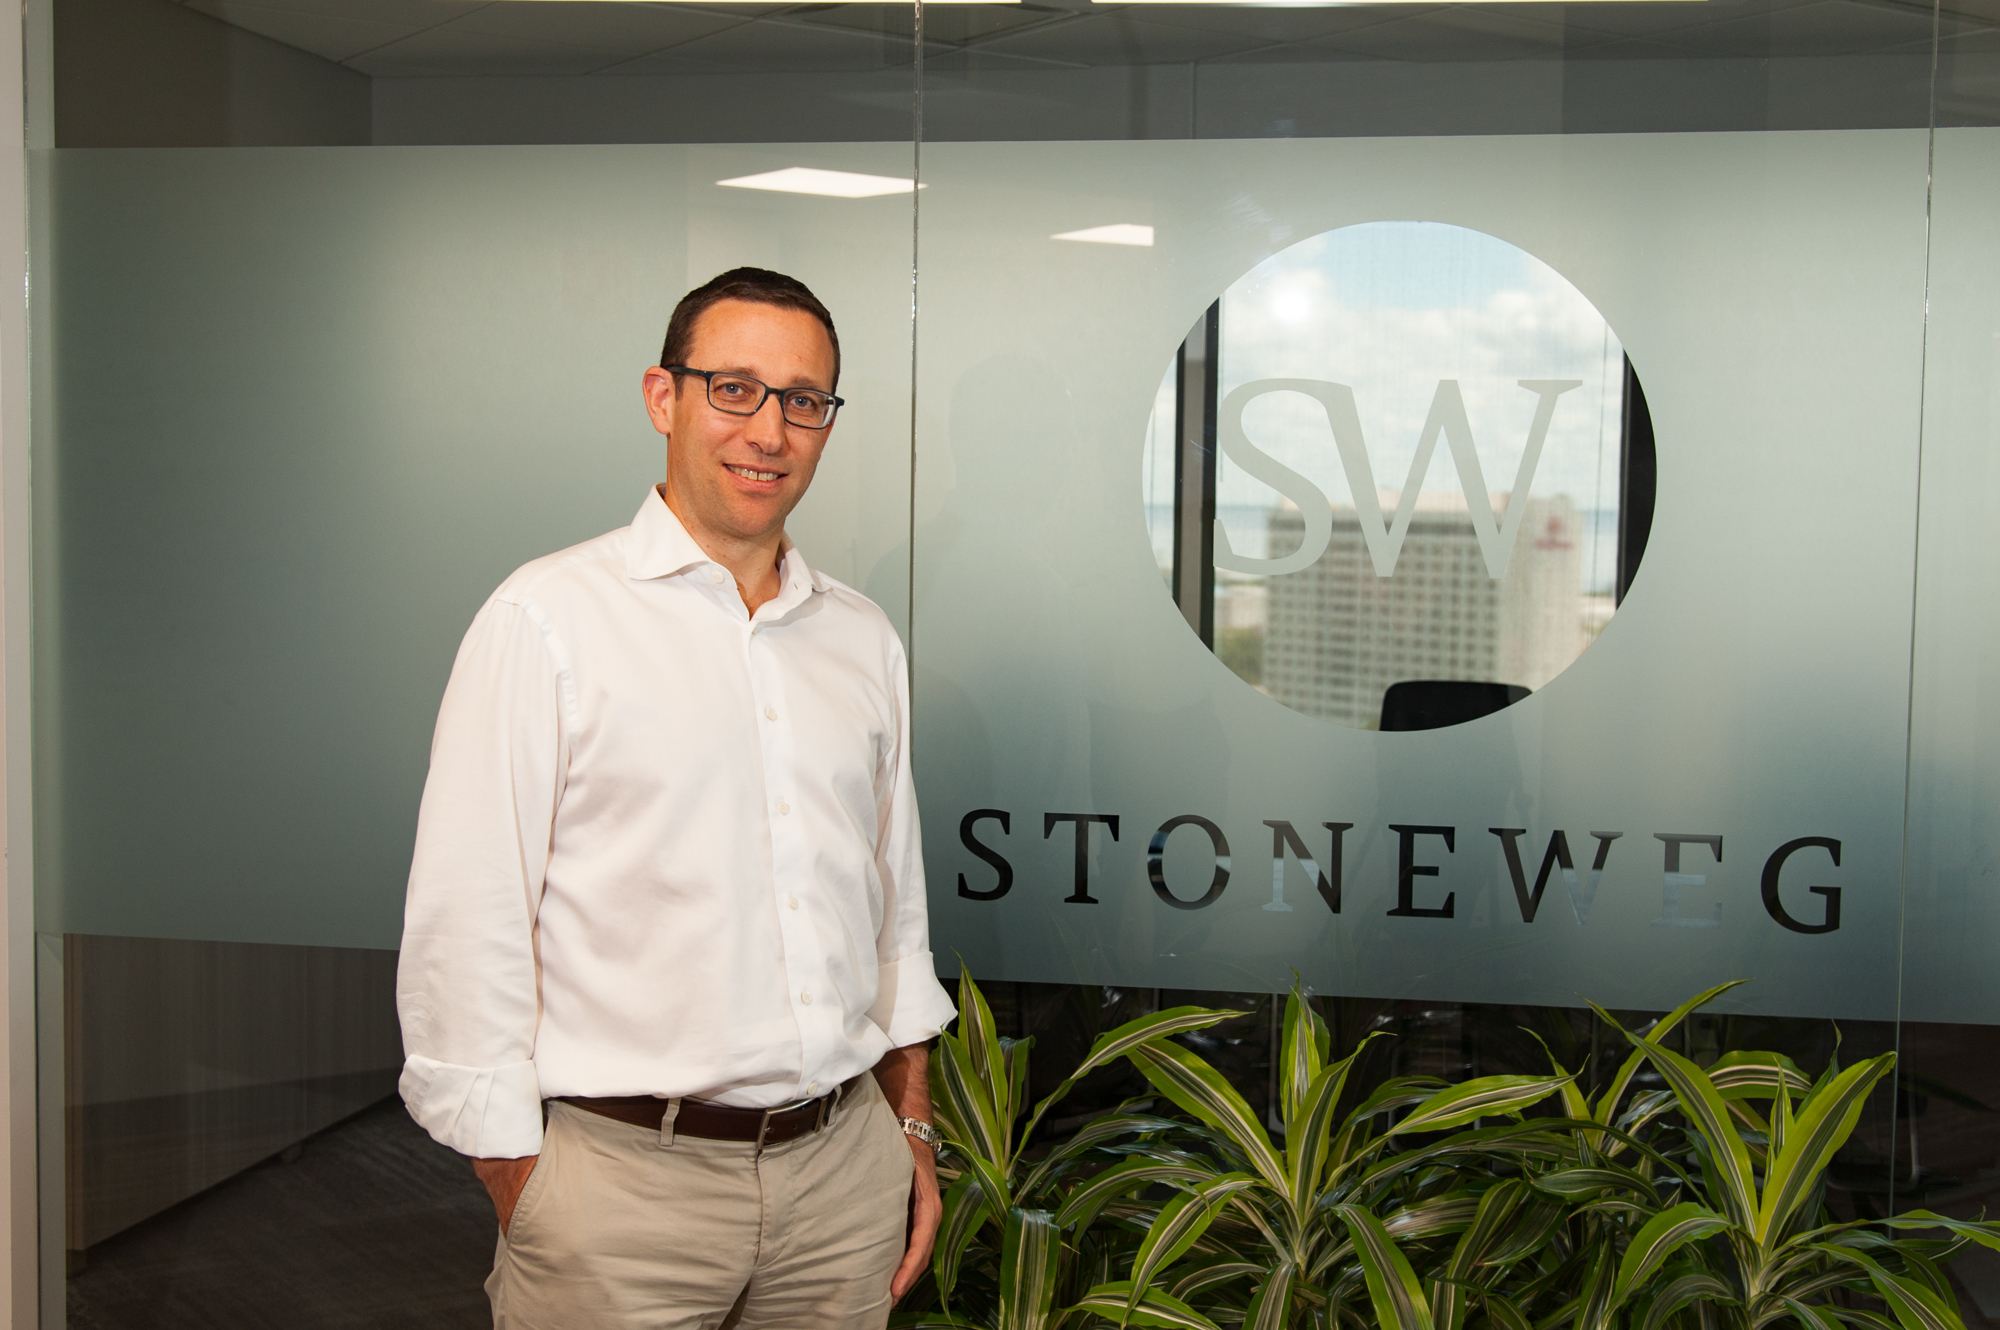 LORI SAX -- Patrick Richard is the CEO of Stoneweg US, which has focused on workforce housing in secondary growth markets and whose portfolio is now valued at more than $1 billion.